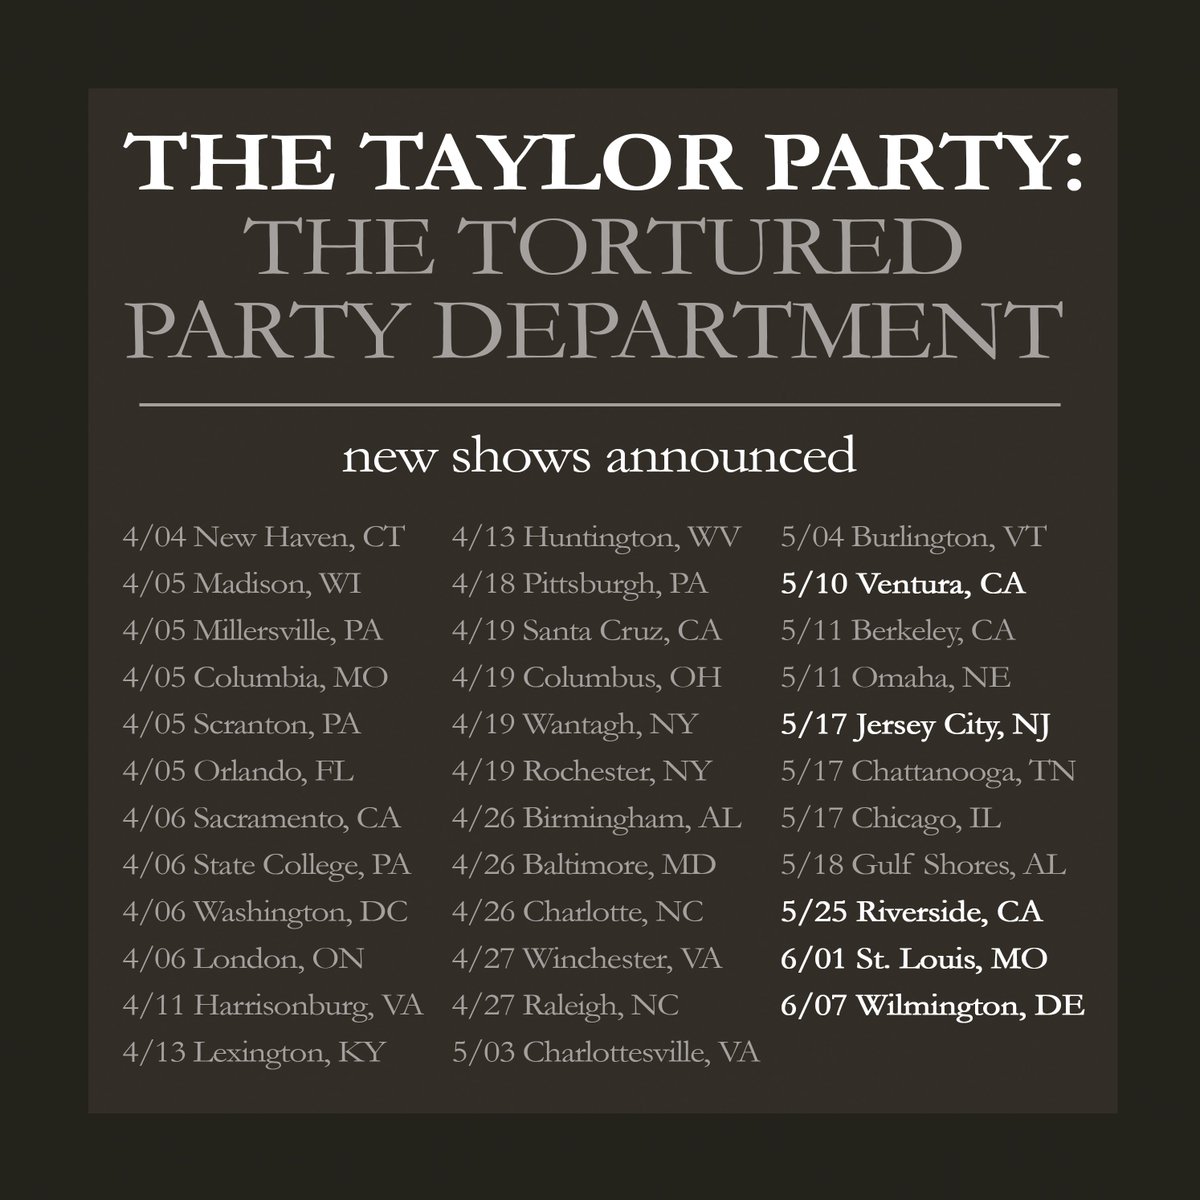 🤍NEW SHOWS ANNOUNCED🤍 The Tortured Poets Department Era is right around the corner! Did you get your member card yet? Lovers Club Presale begins tomorrow for the new additions, tickets on sale Friday💫 thetaylorparty.com